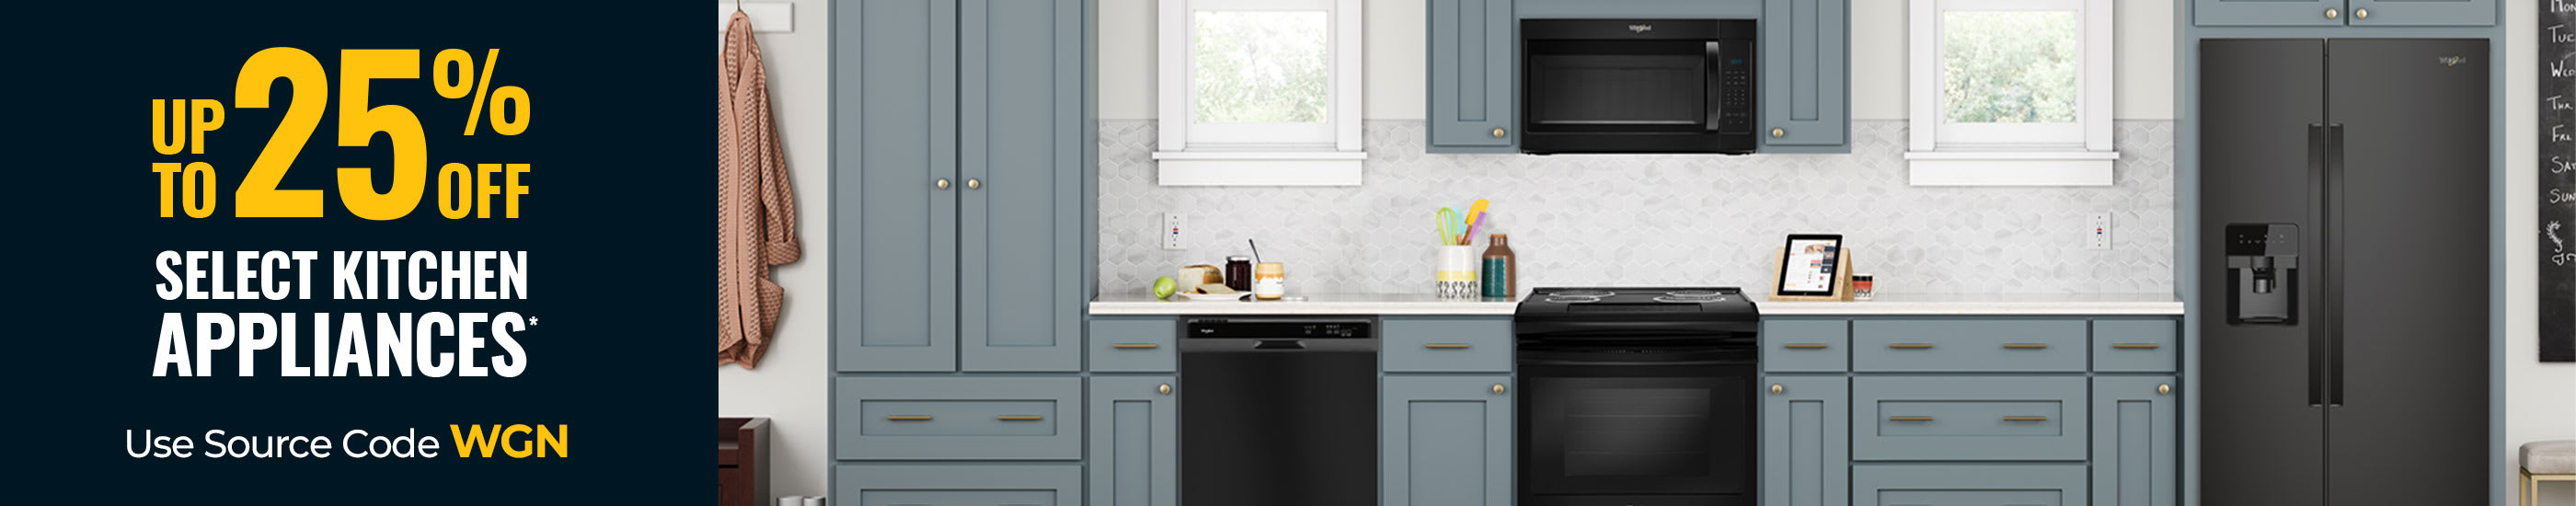 Up To 25 Percent Off Select Kitchen Appliances